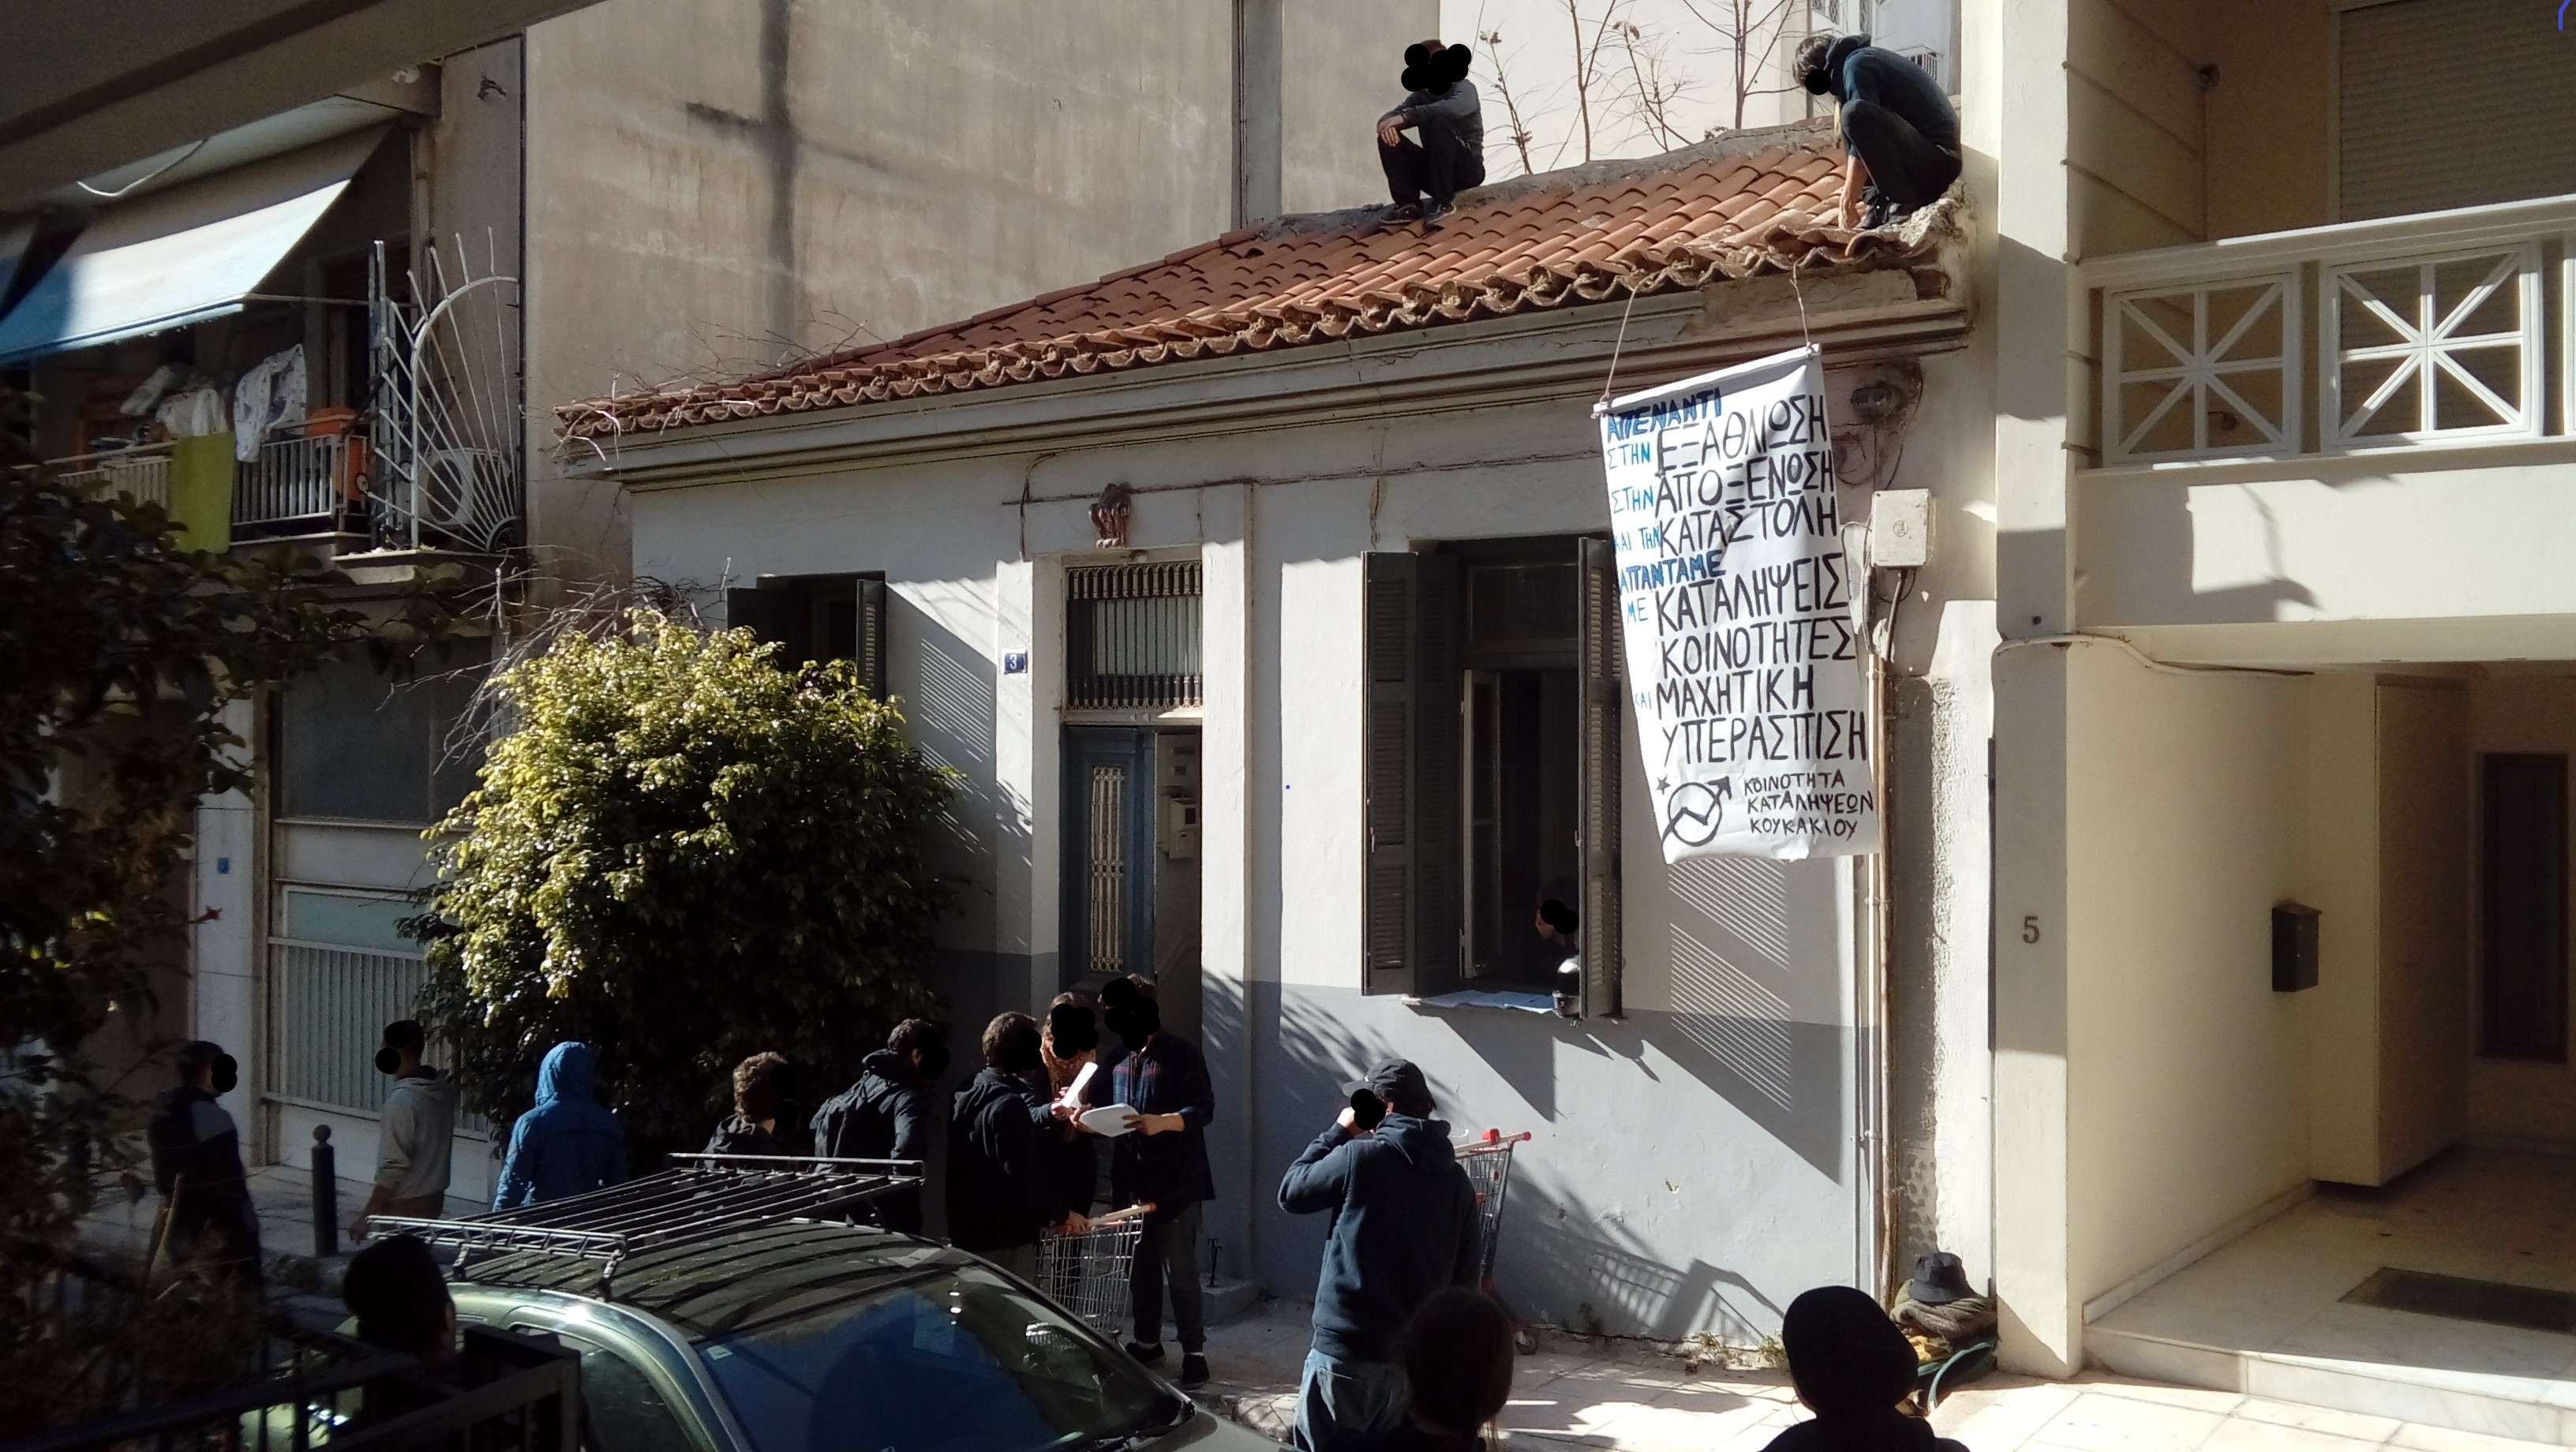 Athens, Greece: Announcement of a new squat